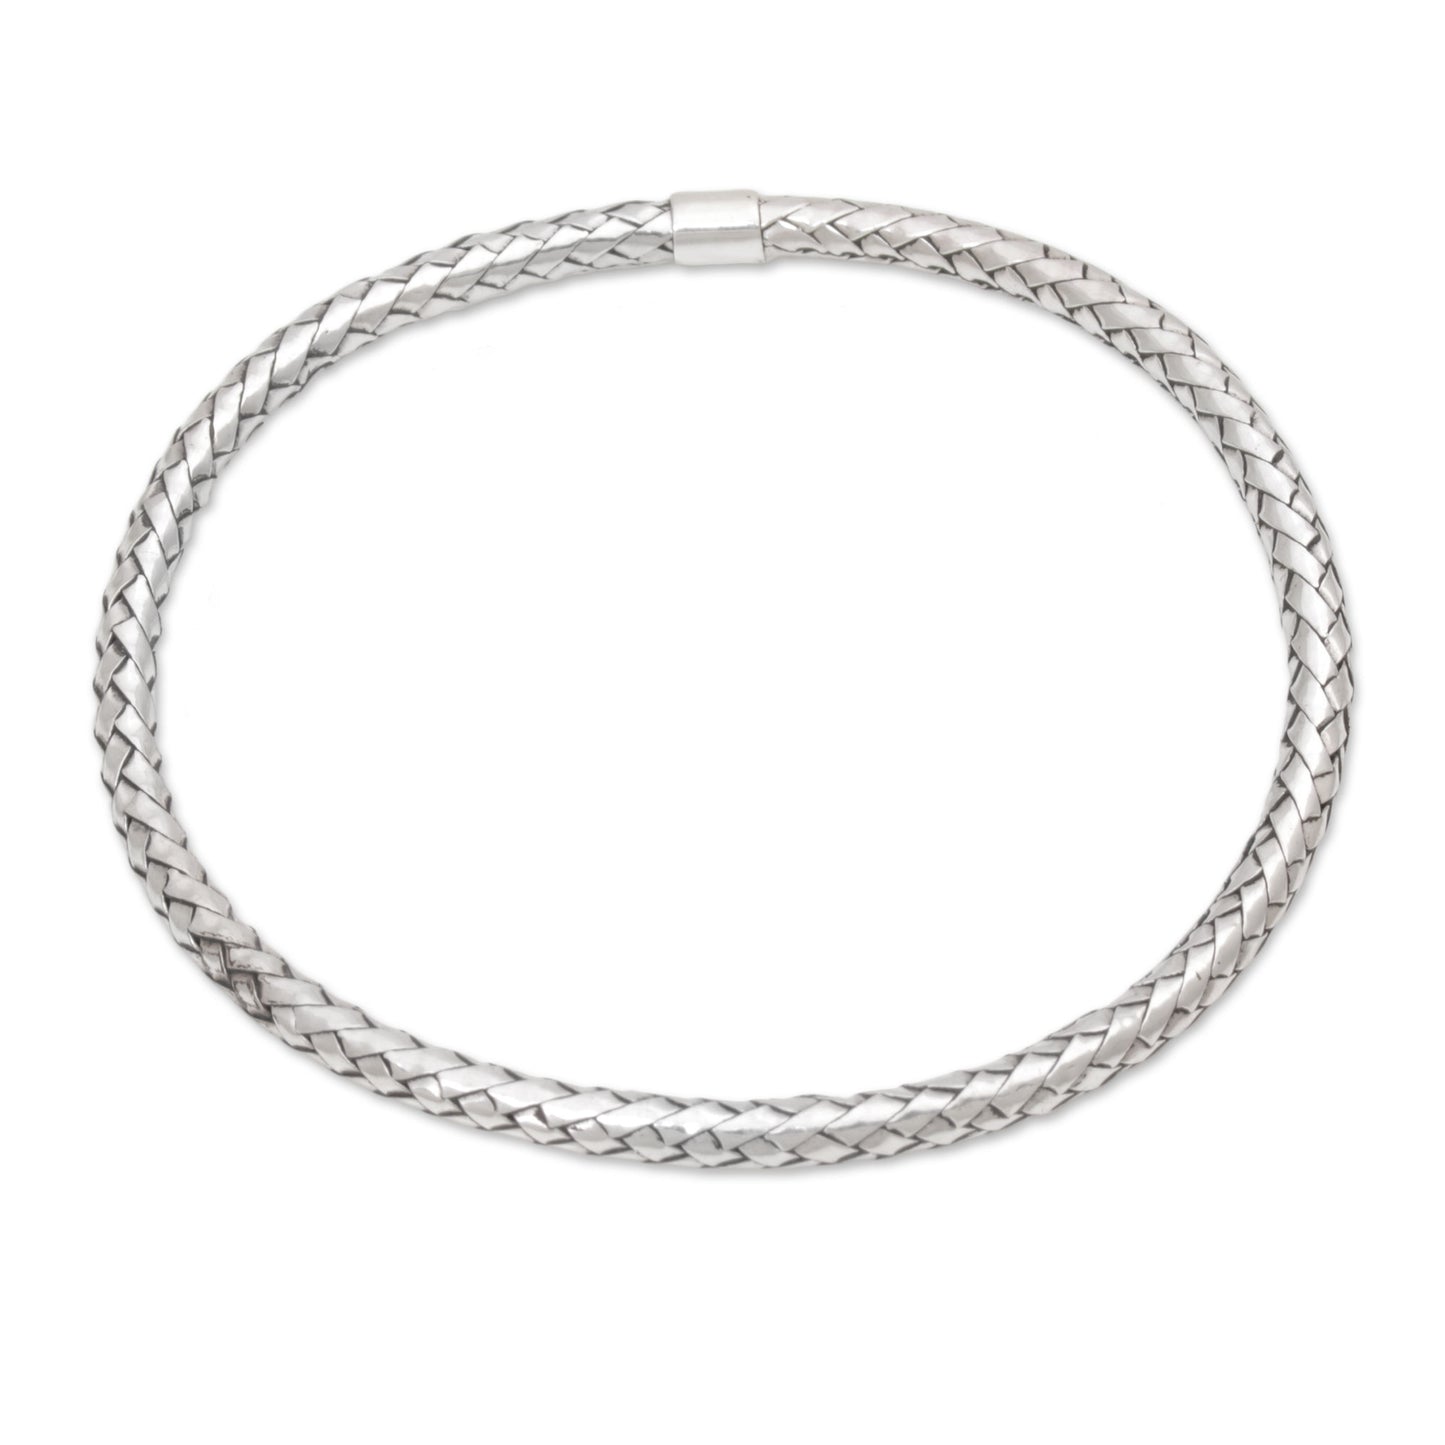 Simple Perfection Handmade Sterling Silver Bangle Bracelet from Indonesia